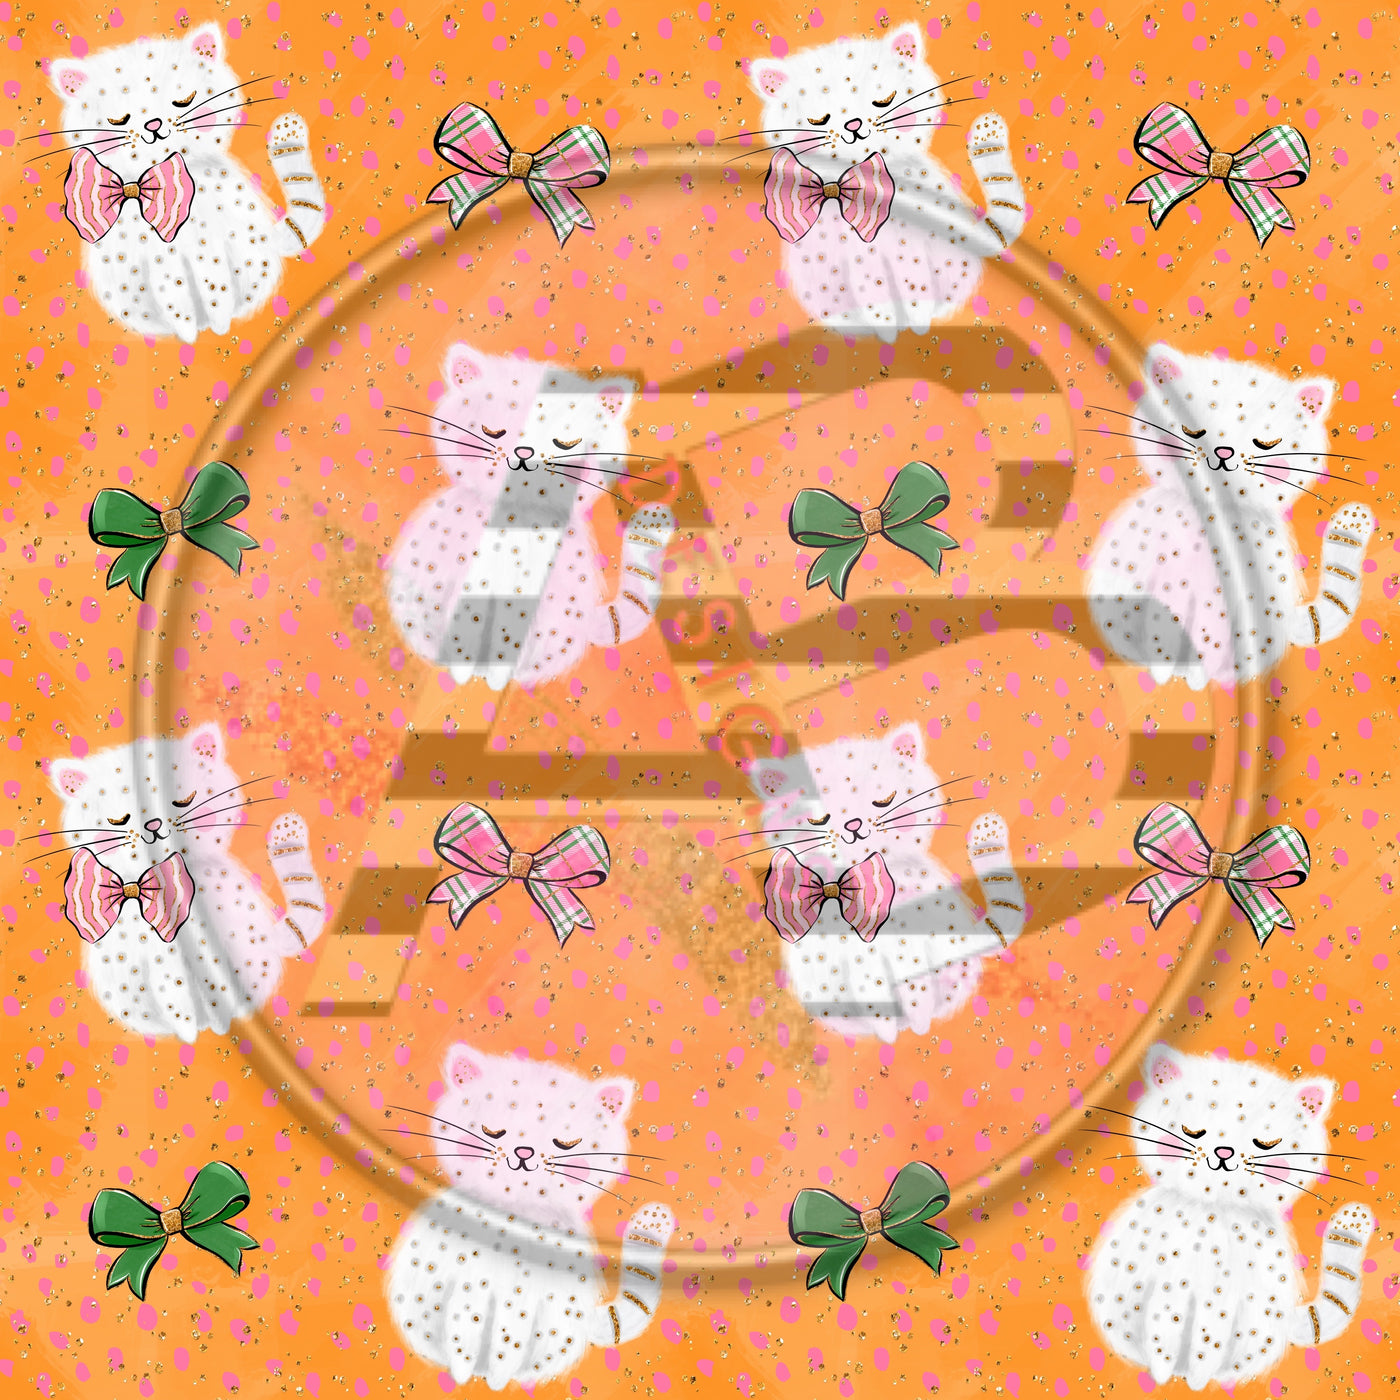 Adhesive Patterned Vinyl - Cats 877